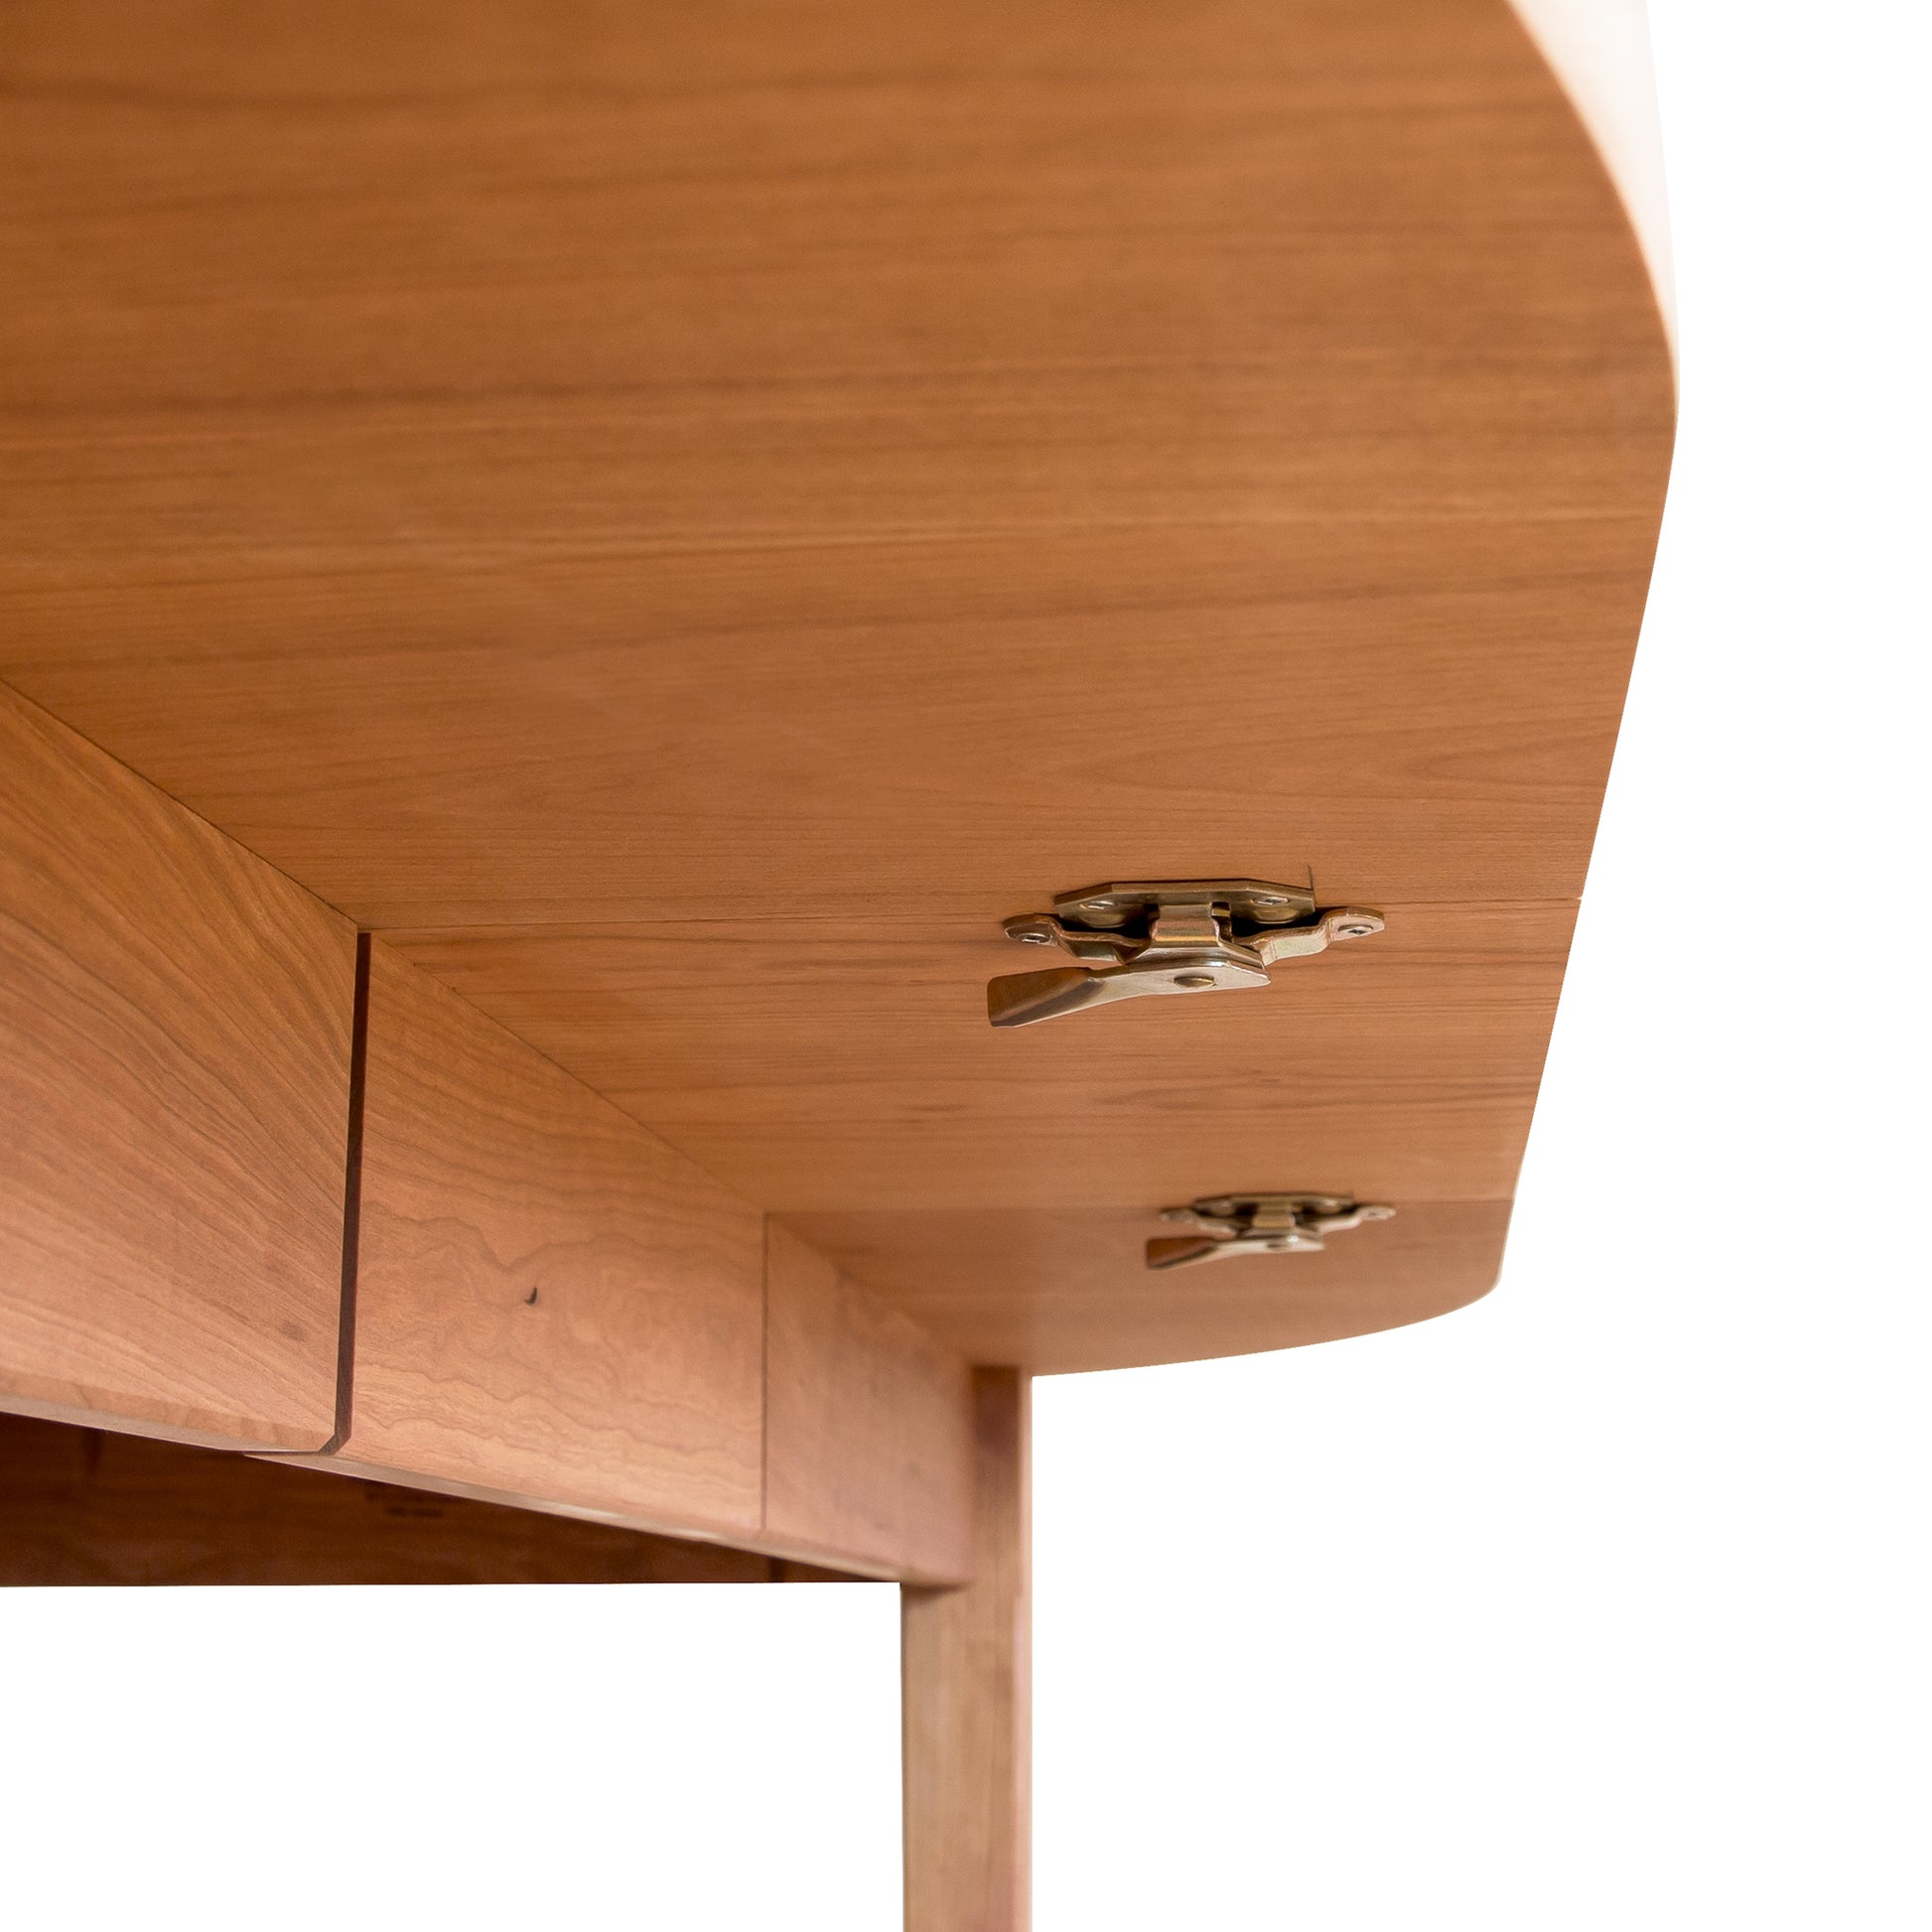 Close-up of a Vermont Shaker Oval Extension Dining Table drawer, crafted from sustainably harvested wood by Maple Corner Woodworks, showing metal hinges partially open, with a clean, minimalist design. The background is a soft beige, focusing on the craftsmanship.